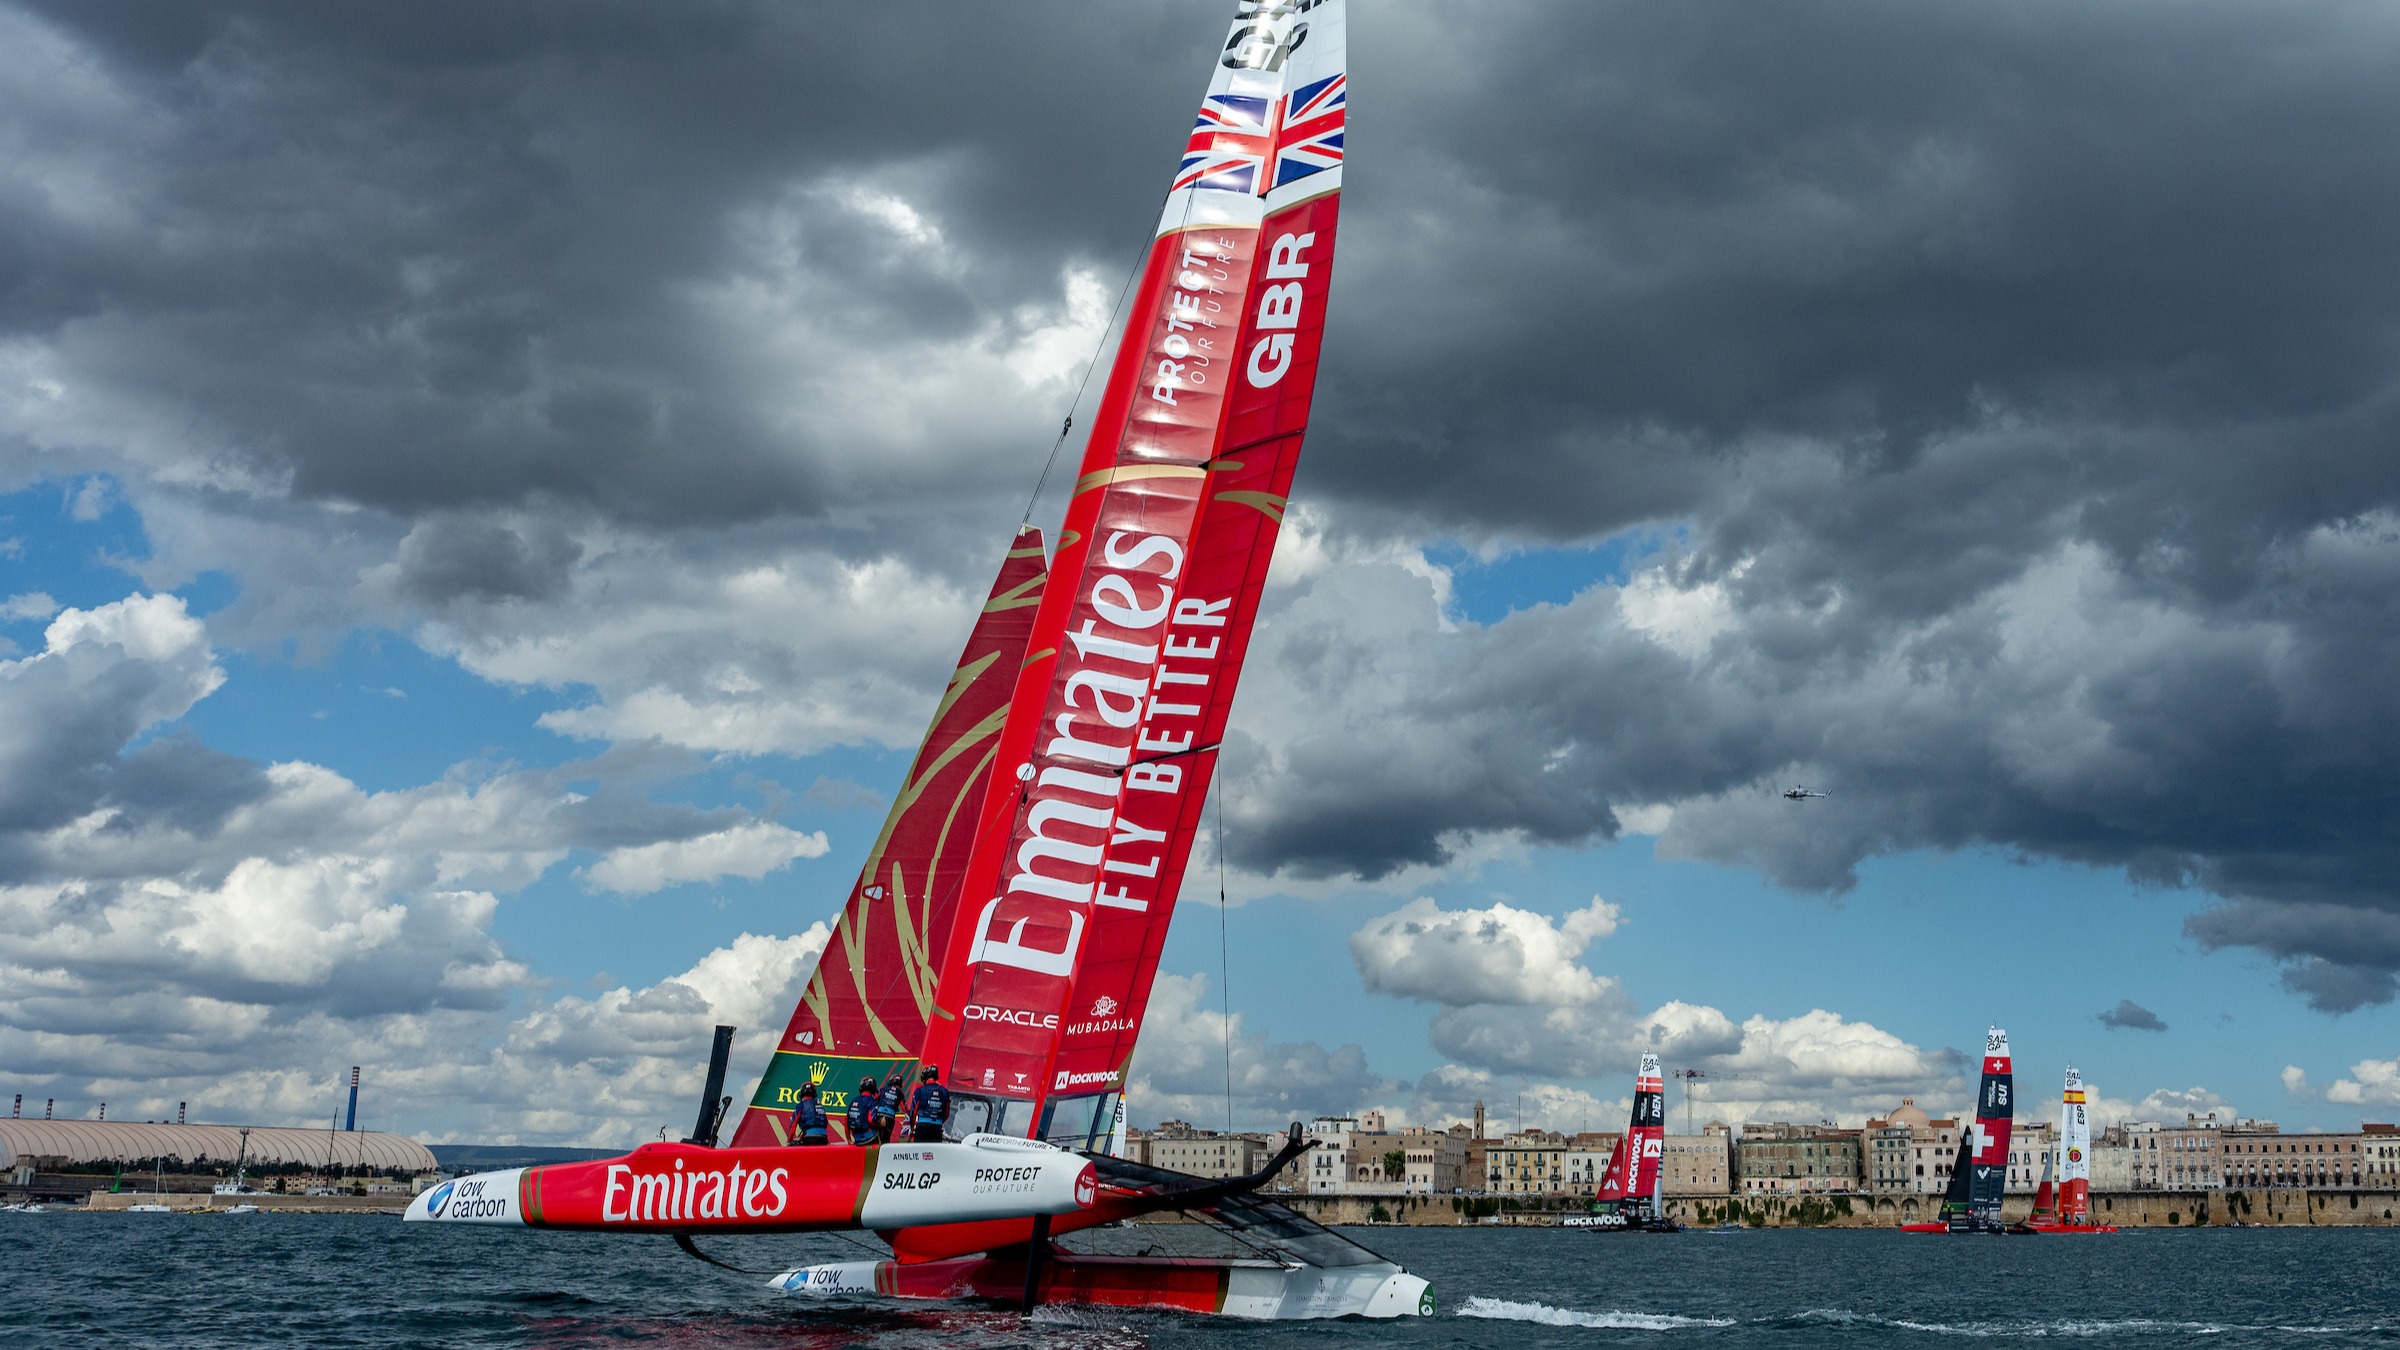 Season 4 // Emirates GBR in H1 mode on second day of racing in Taranto